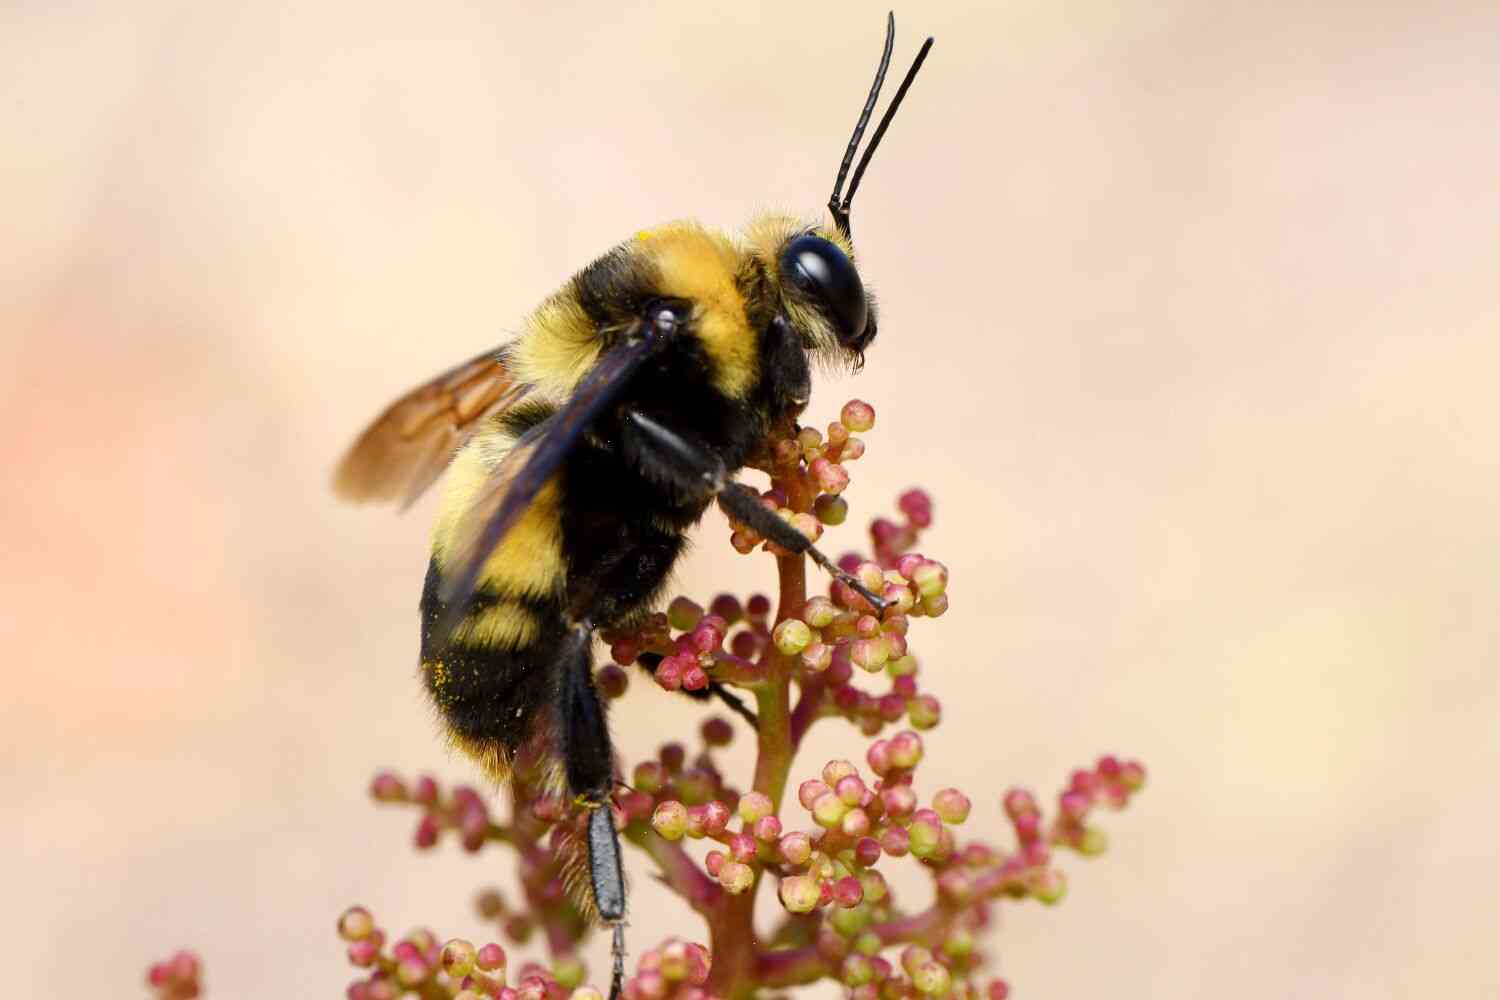 The world's largest bee is actually a bumblebee